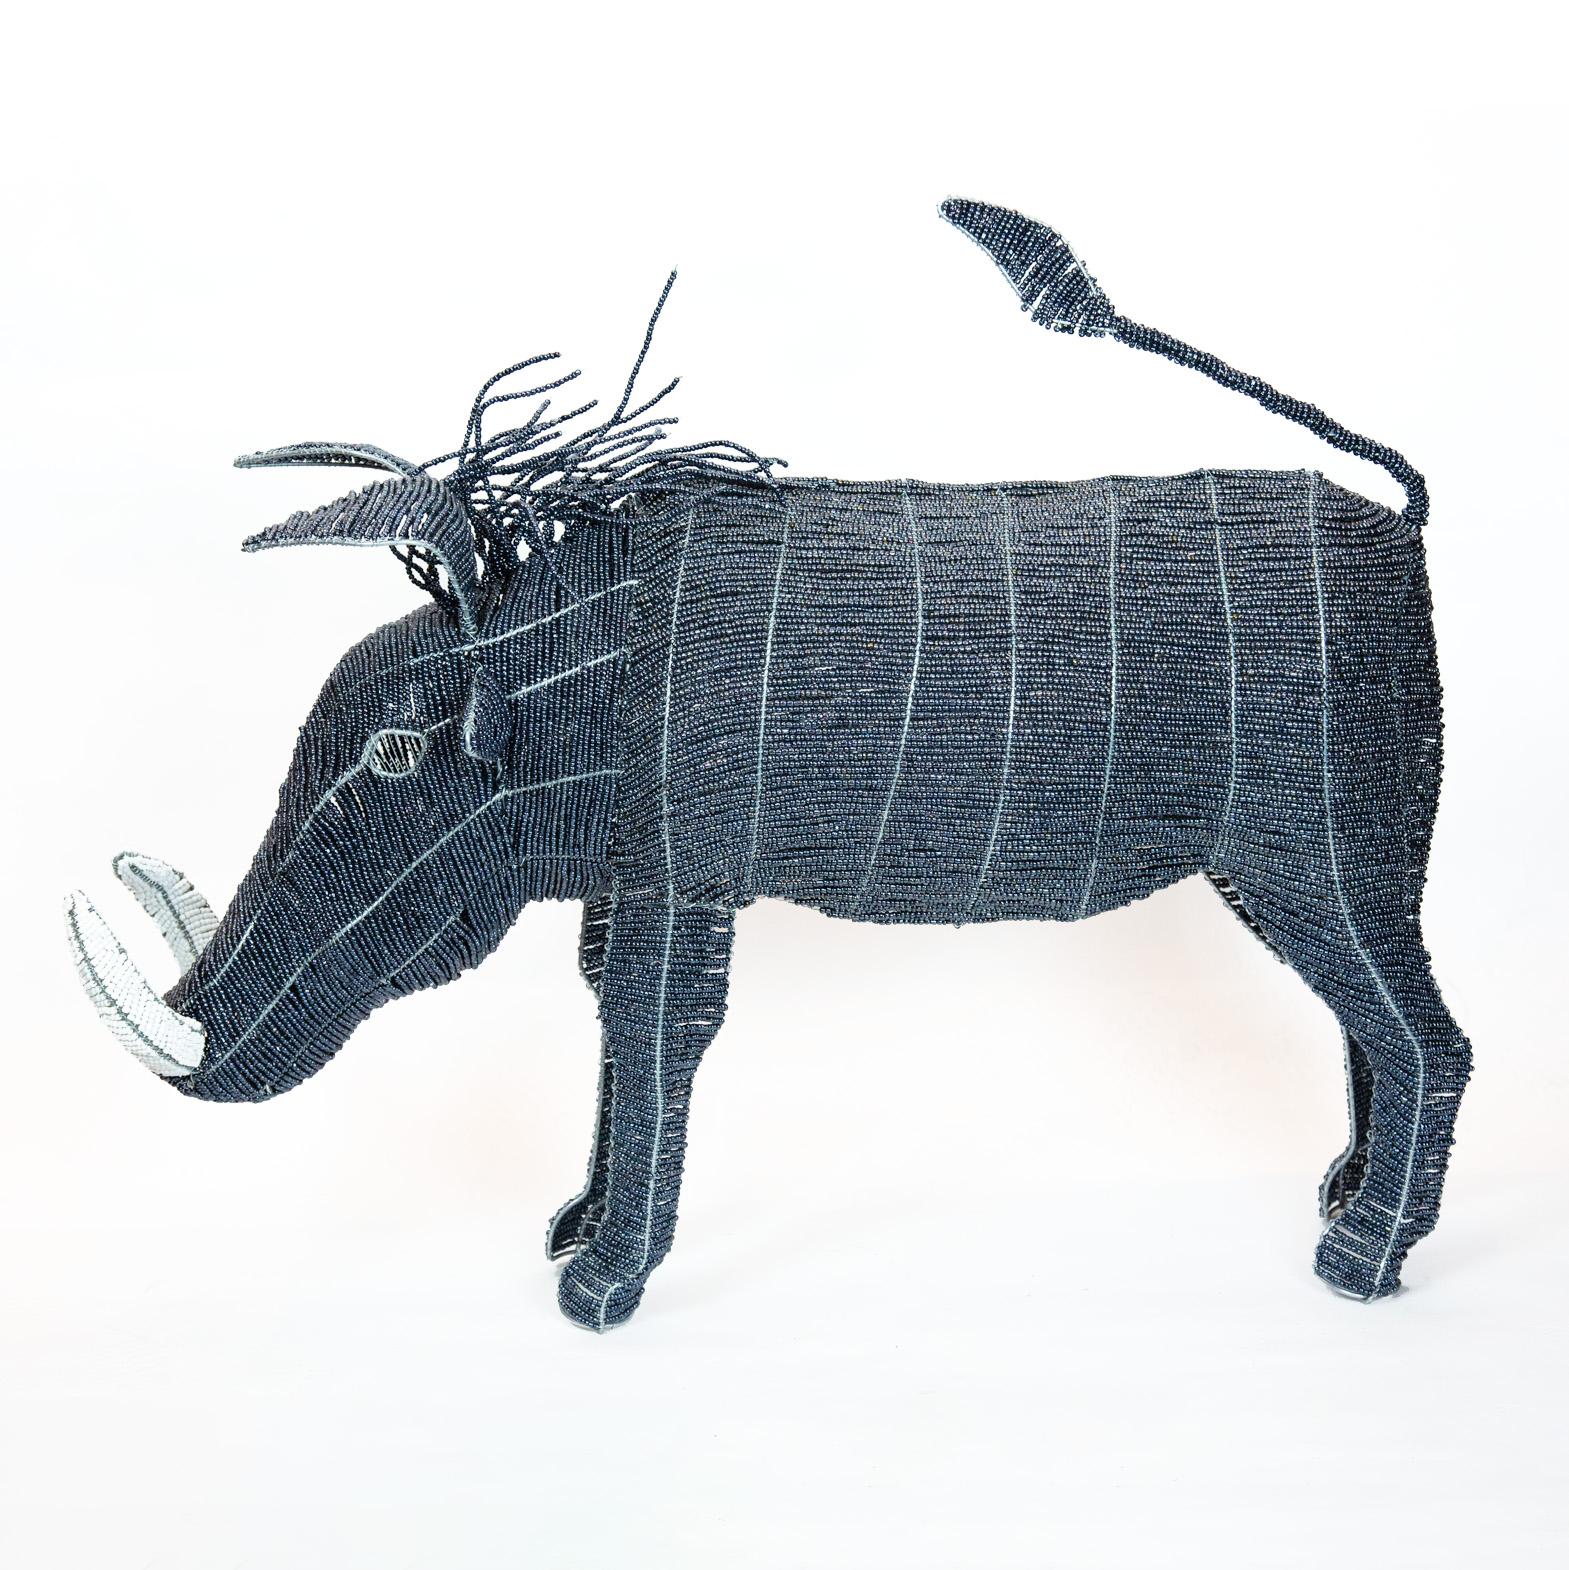 Large Beaded African Warthog.  Handmade in Africa from beads and wire.  Deep-blue metallic body, hair, and tail with white tusks.

36